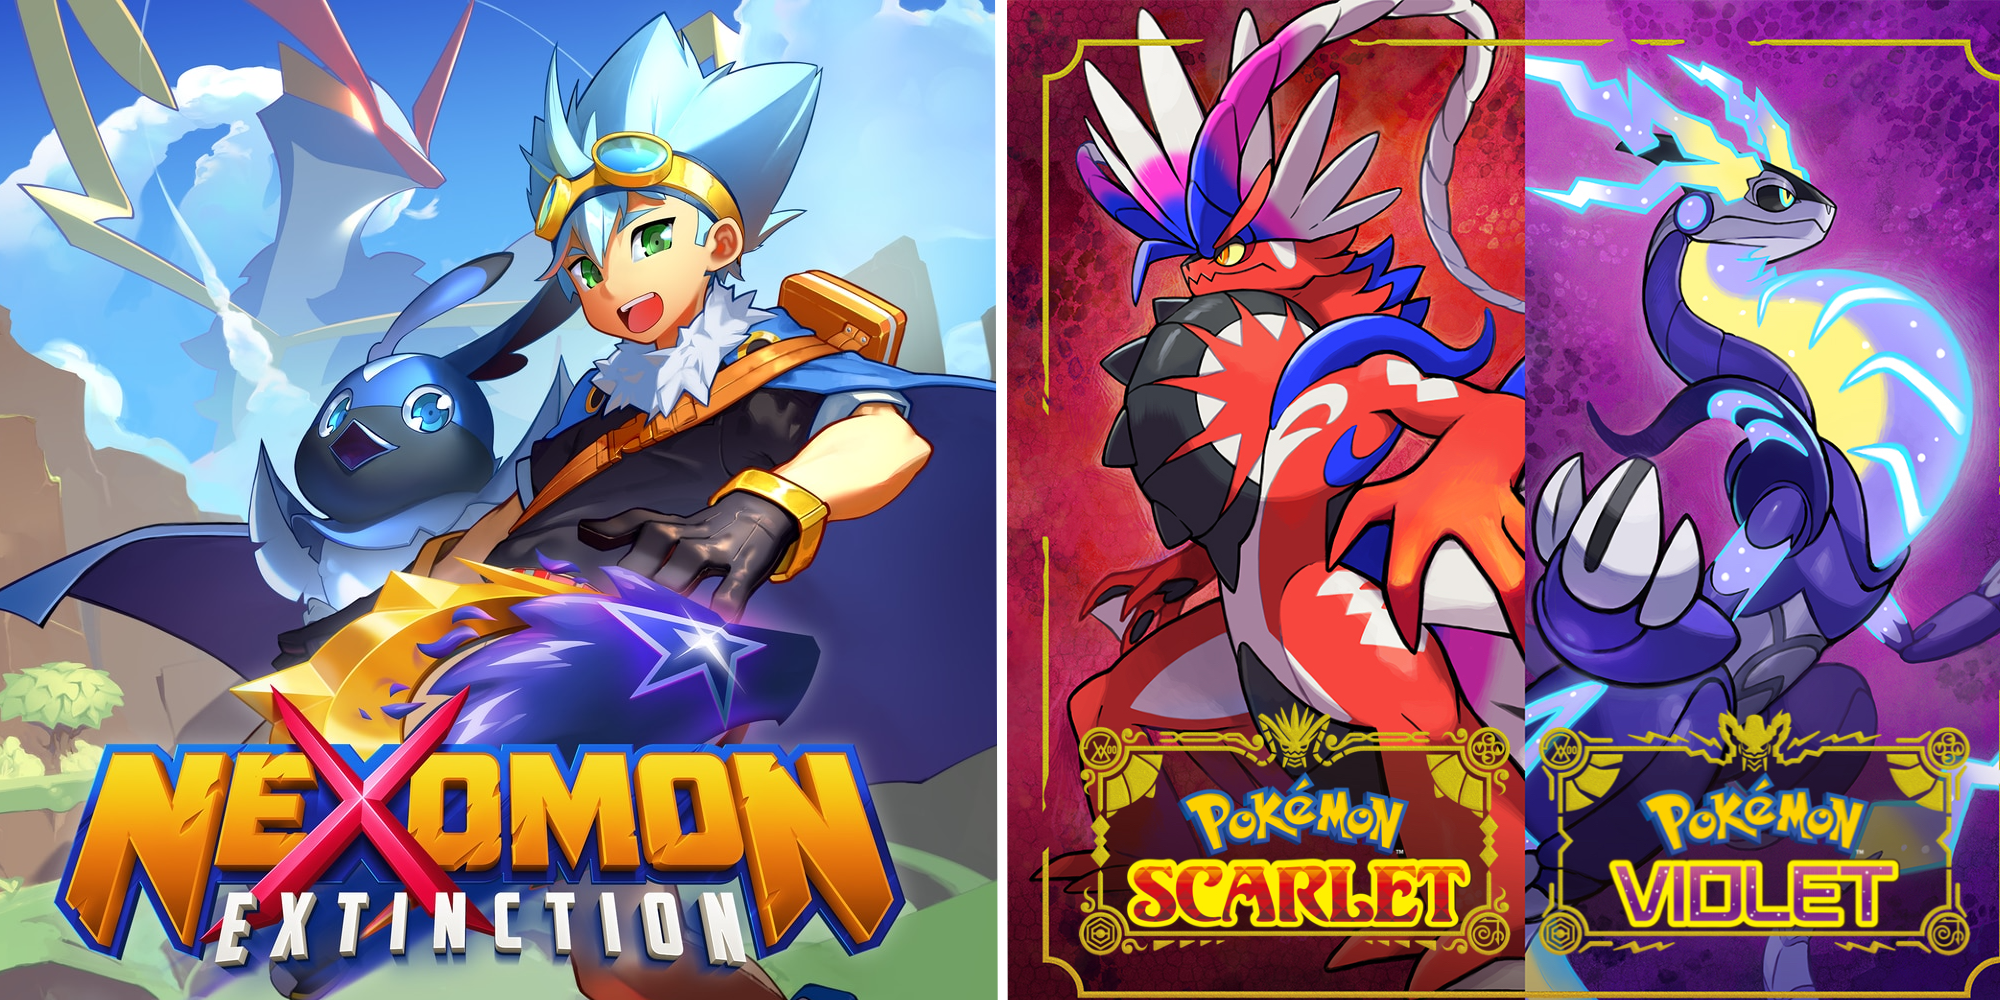 Differences Between Pokemon & Nexomon Feature Image: Nexomon Extinction cover on the left, Pokemon scarlet & violet covers on the right